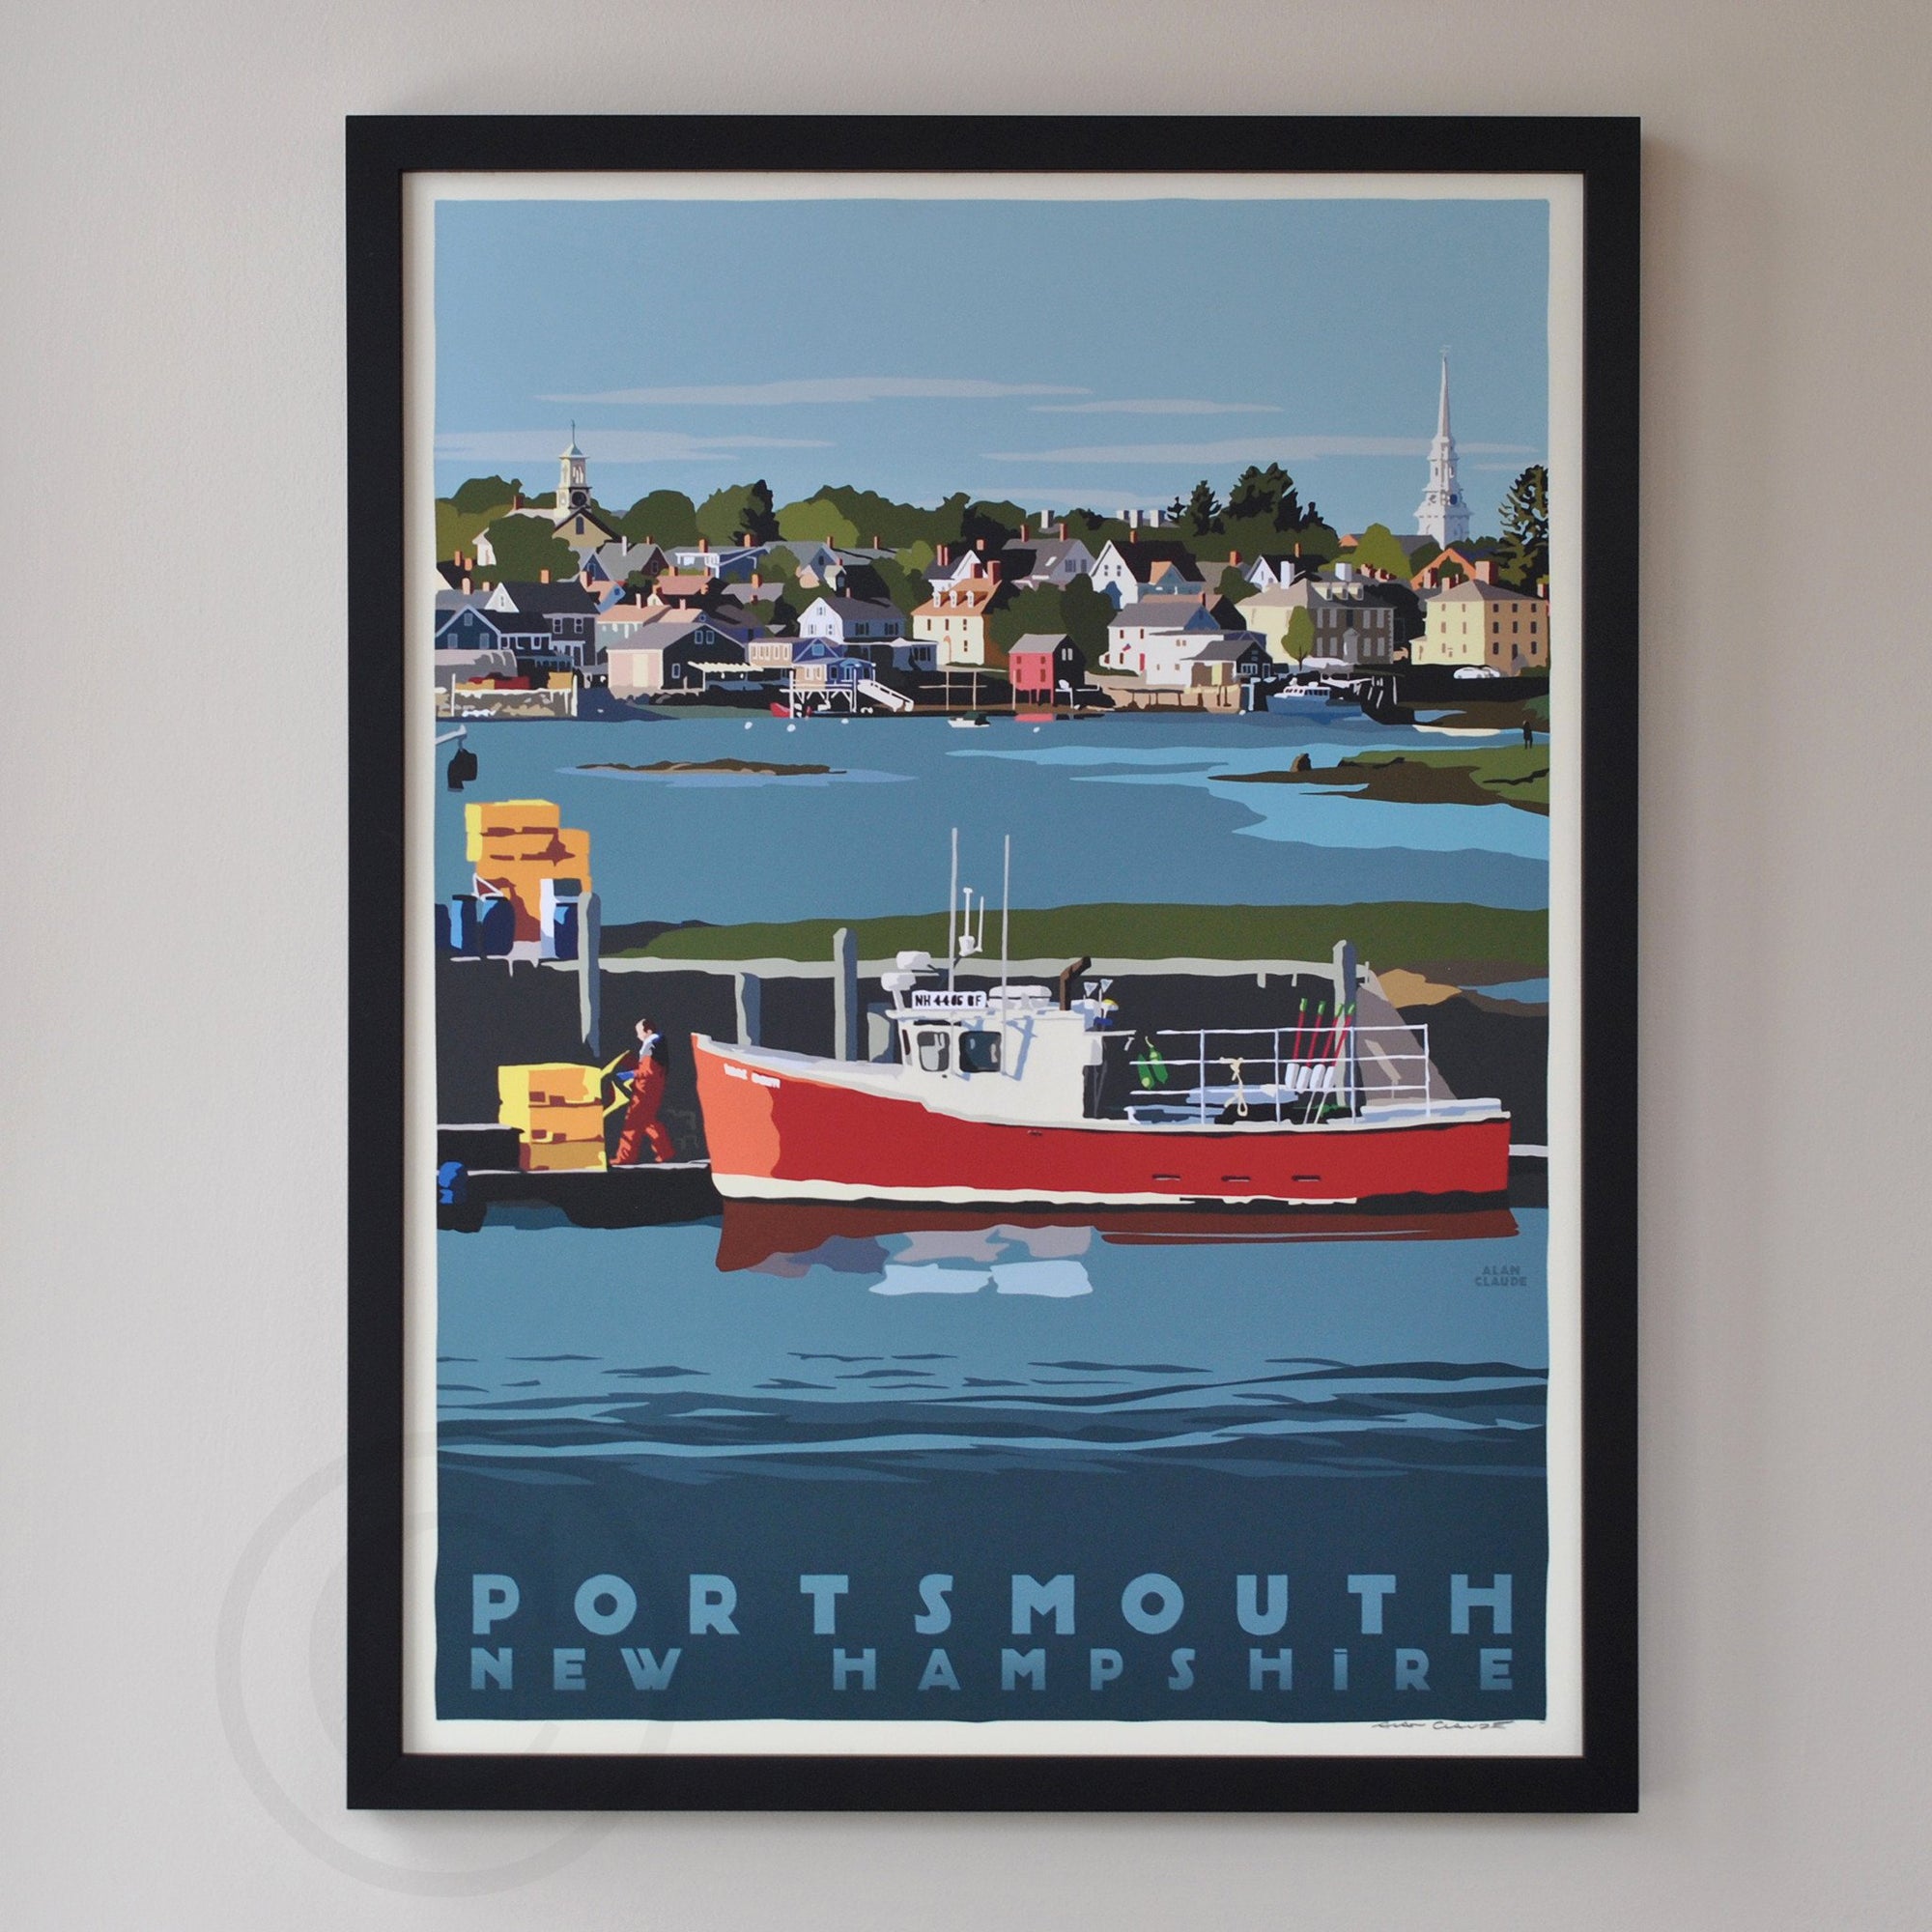 Portsmouth Lobster Boat Art Print 18" x 24" Framed Travel Poster By Alan Claude - New Hampshire